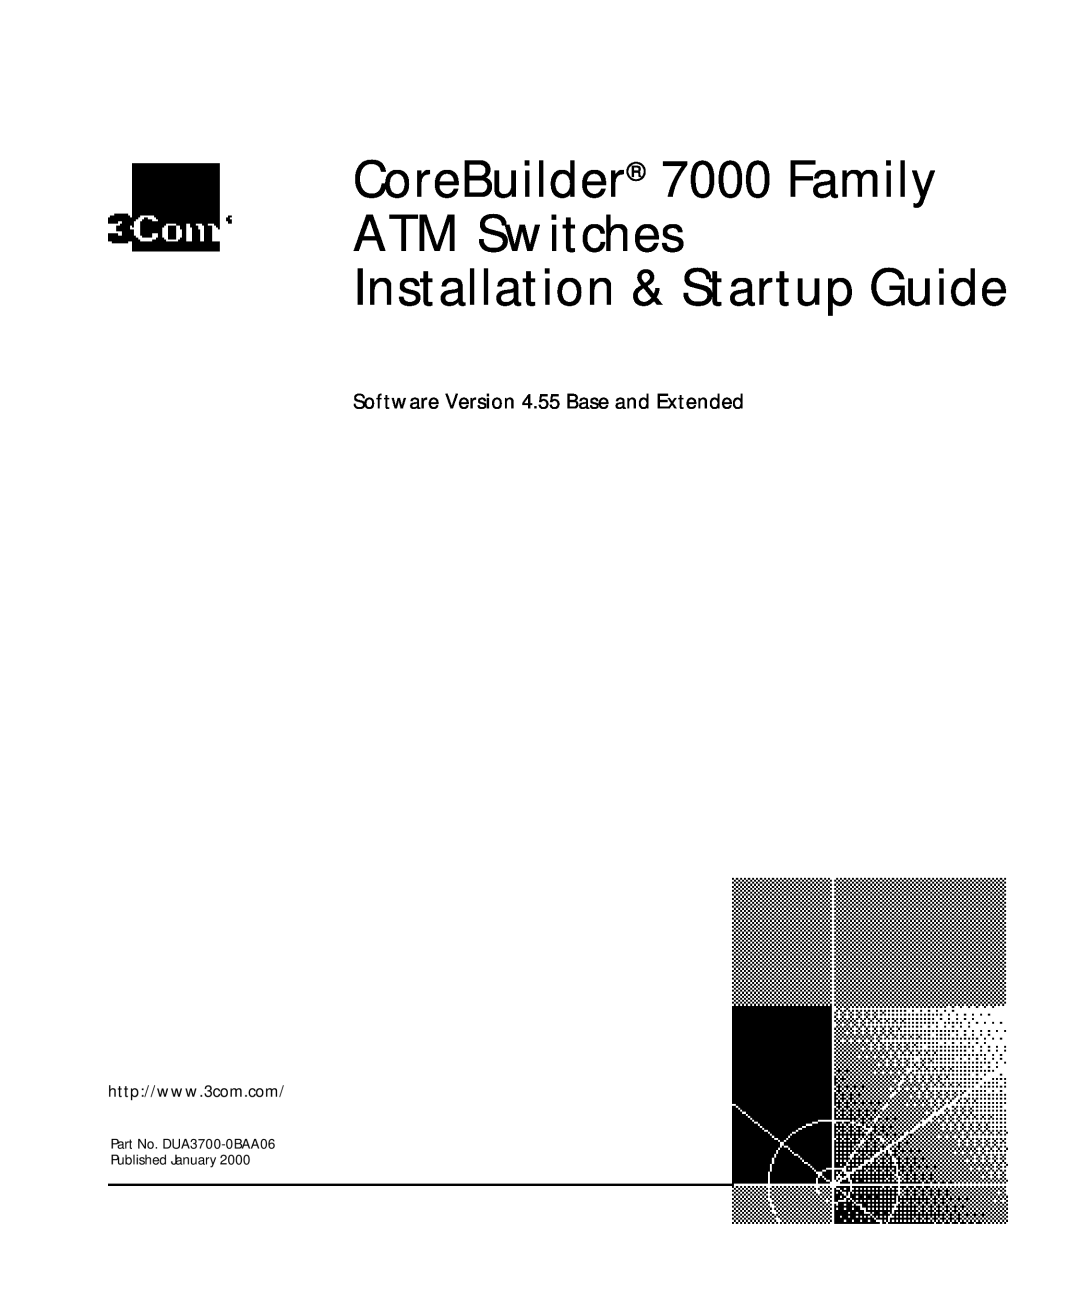 3Com manual CoreBuilder 7000 Family ATM Switches Installation & Startup Guide, Software Version 4.55 Base and Extended 